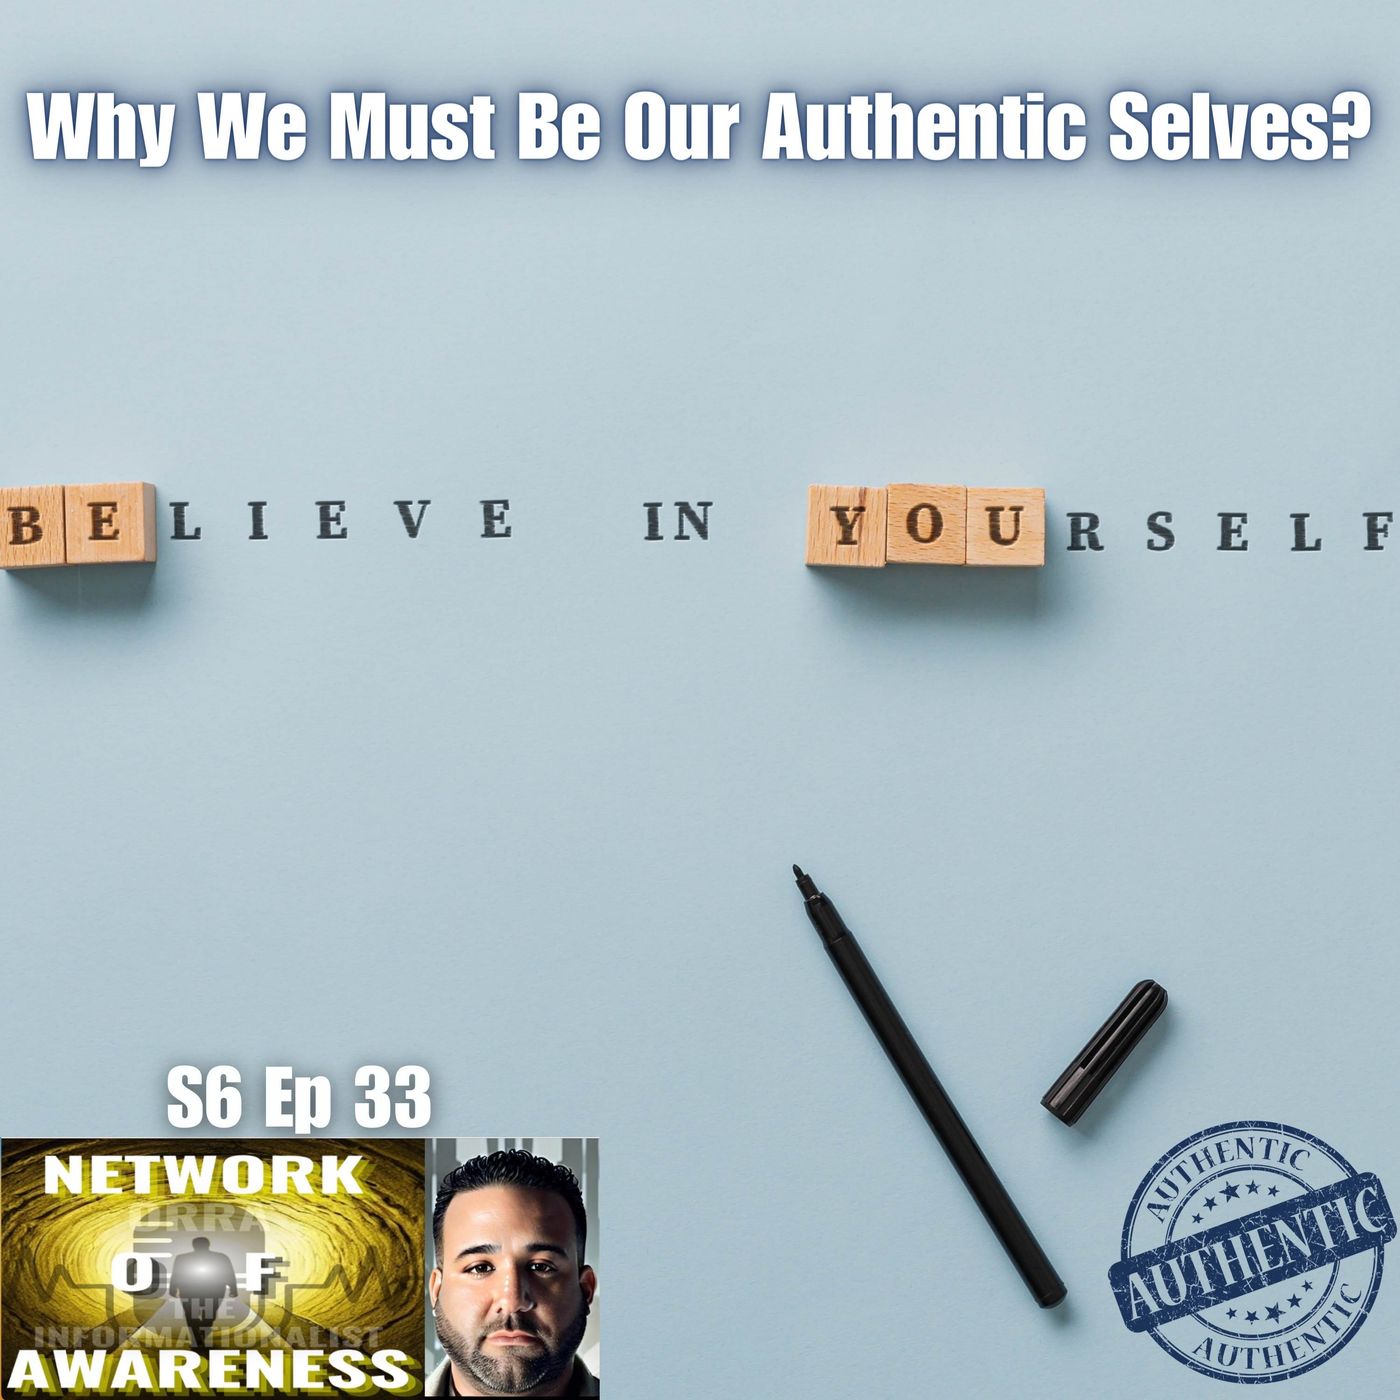 Why We Must Be Our Authentic Selves